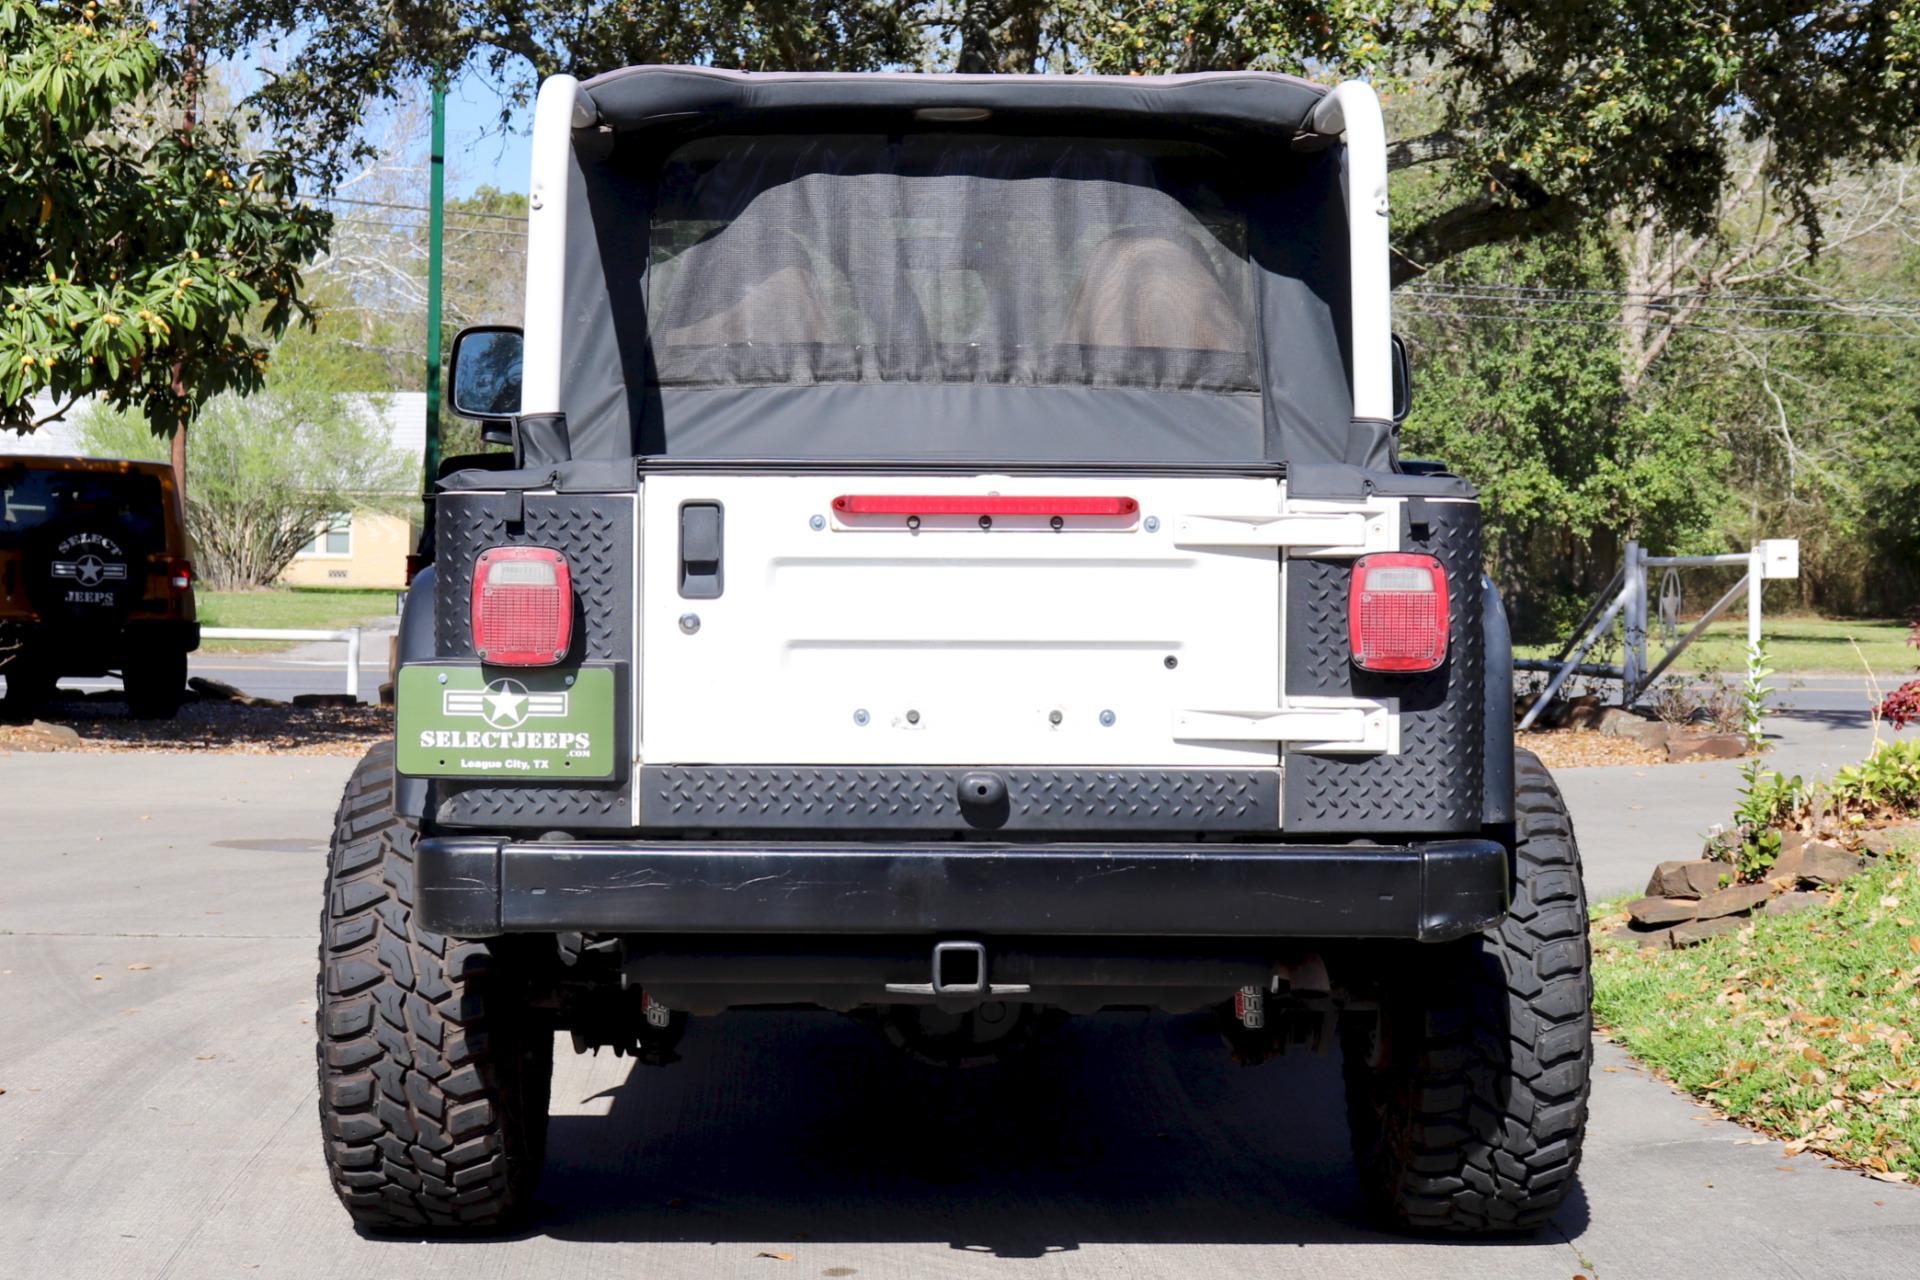 Used 2002 Jeep Wrangler 2dr Sport For Sale ($14,995) | Select Jeeps Inc.  Stock #757744